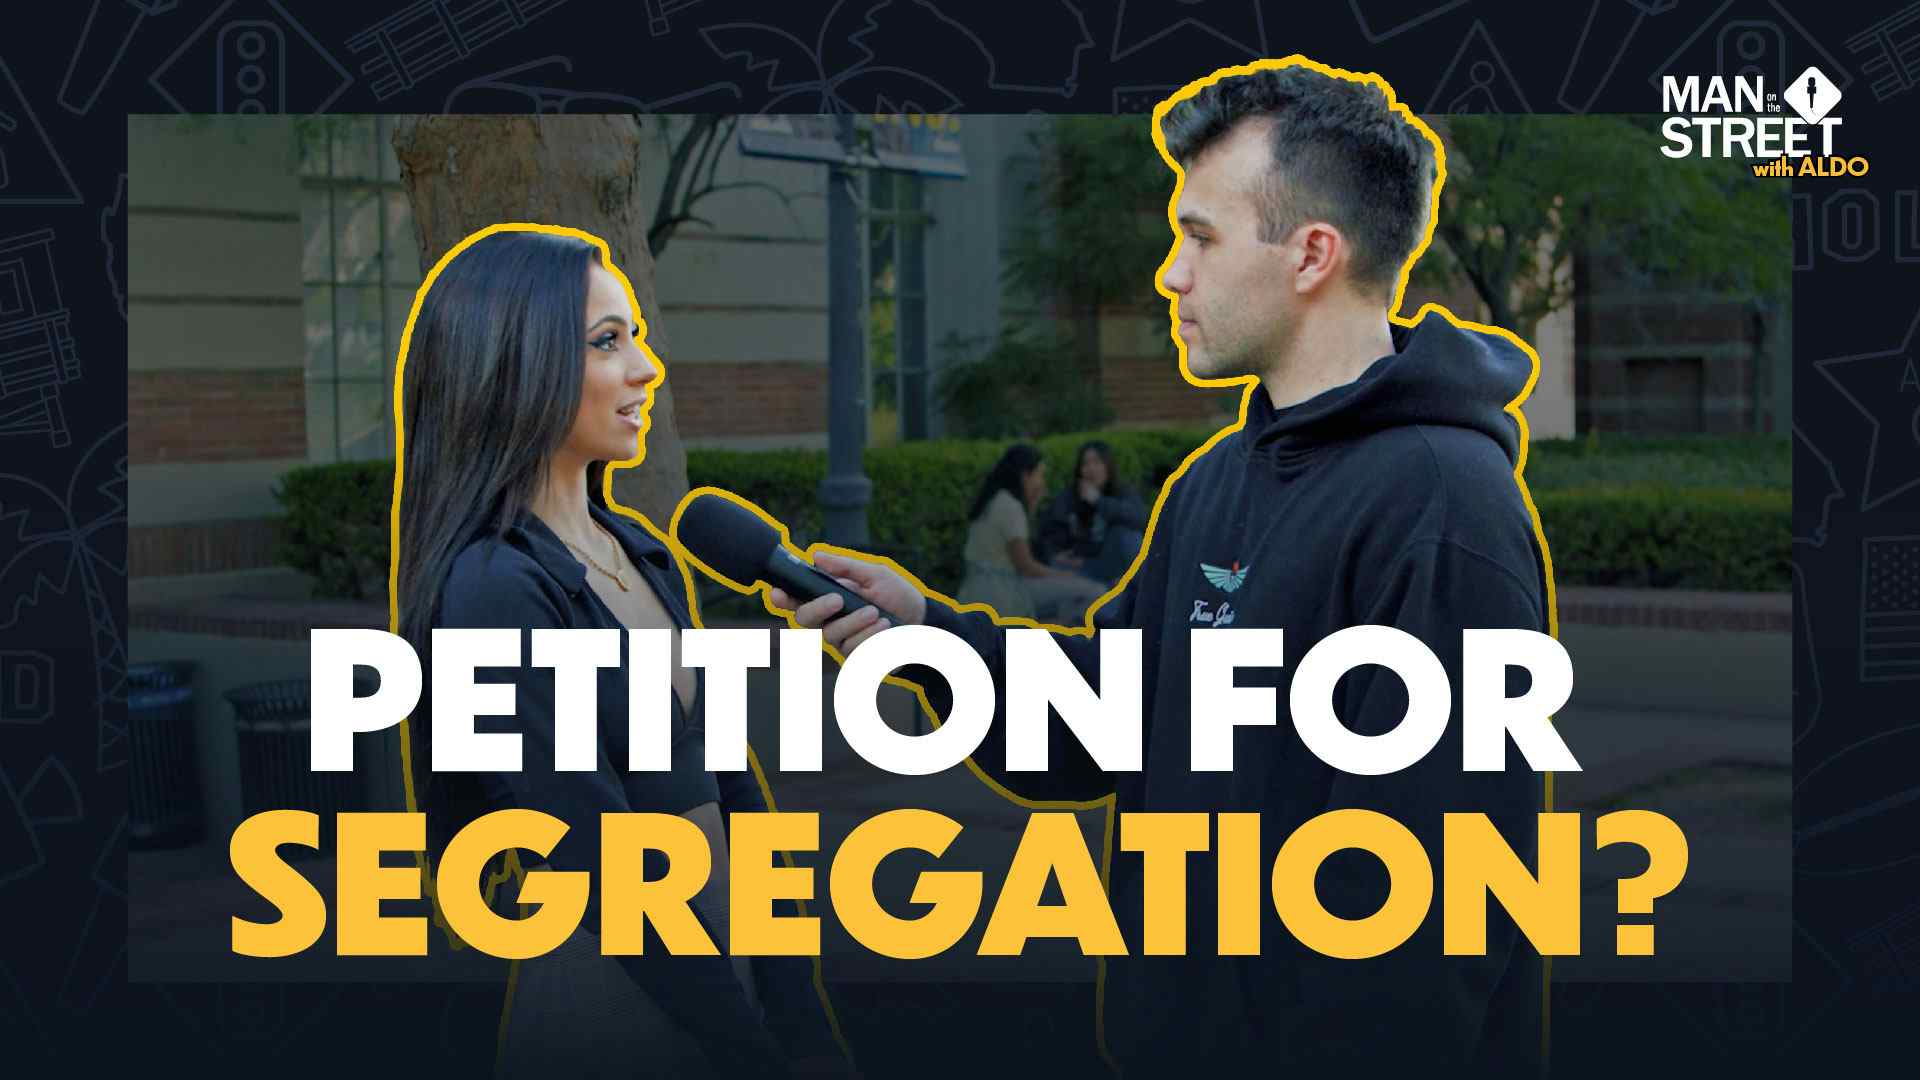 Would You Sign a Petition to Bring Back Segregation?